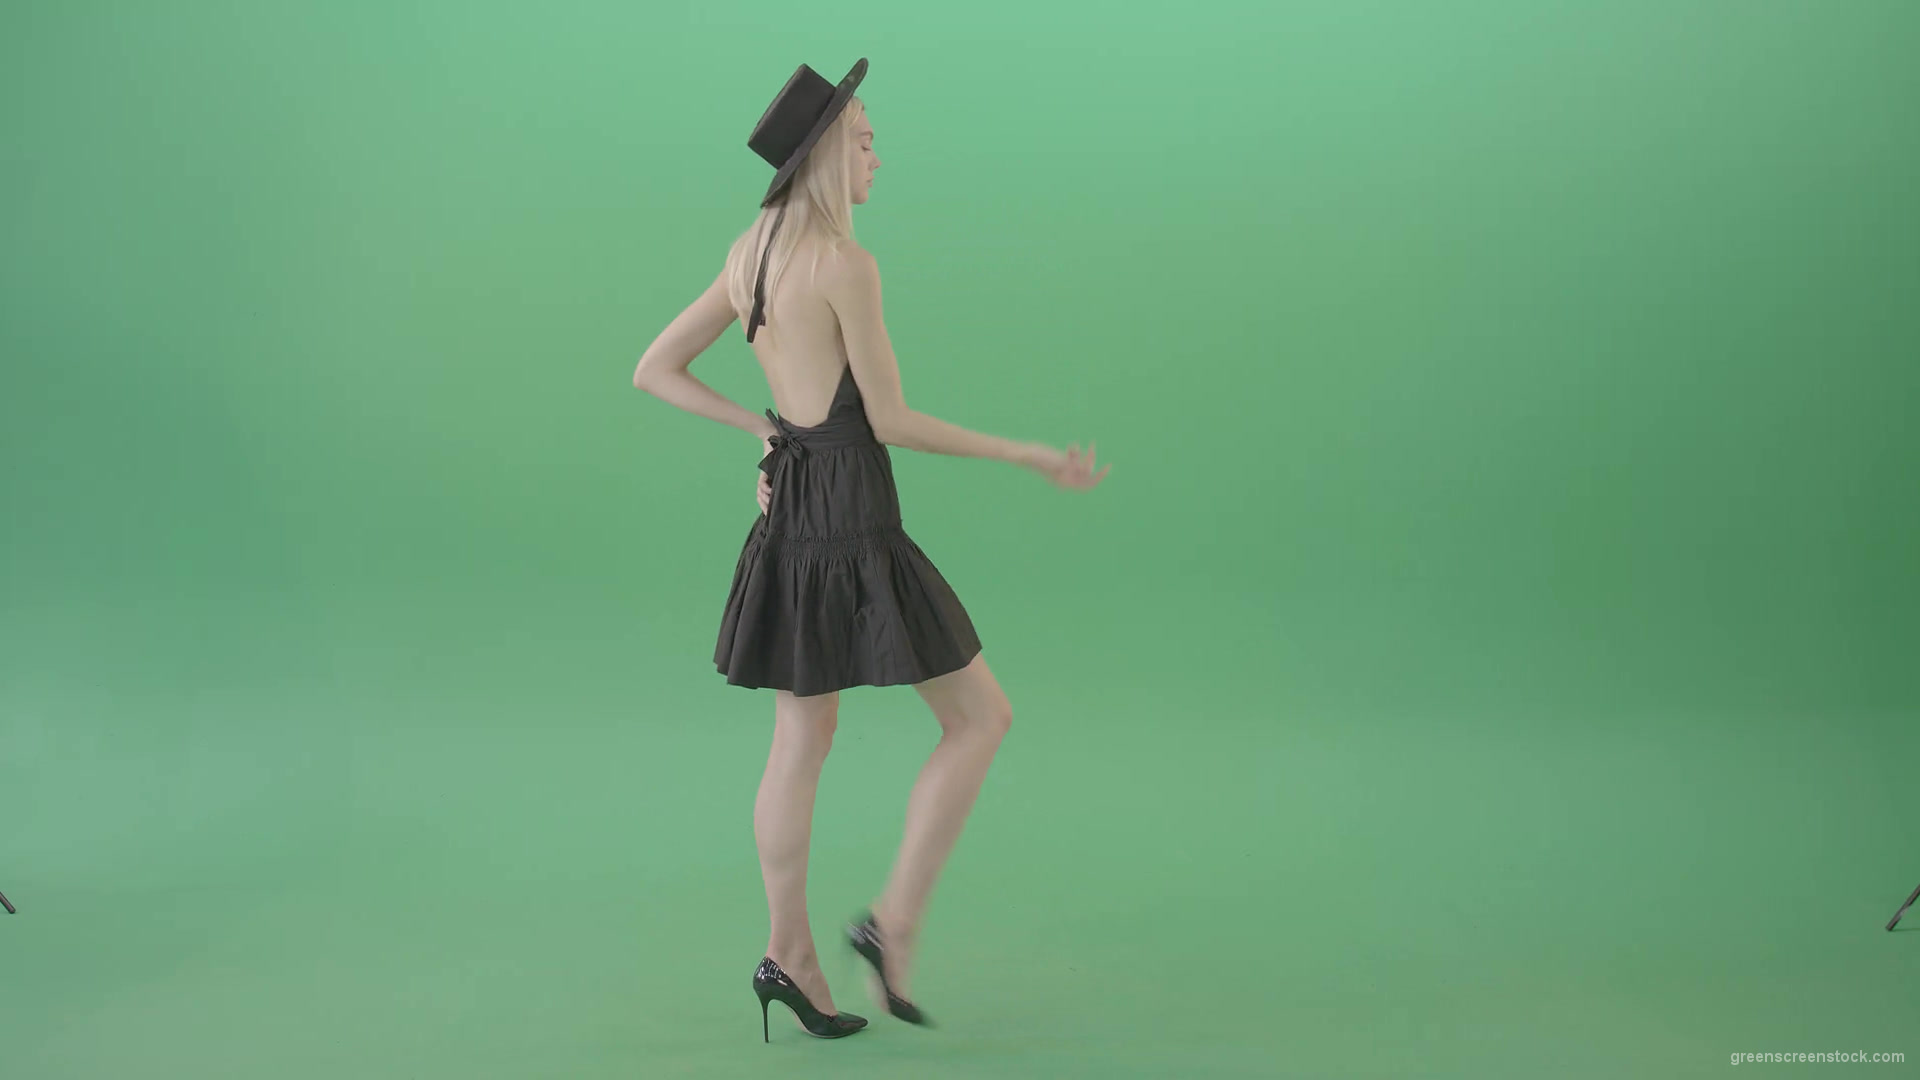 Sexy-blonde-girl-dancing-in-black-fashion-wear-dress-isolated-on-chromakey-Green-Screen-Video-Footage-1920_002 Green Screen Stock